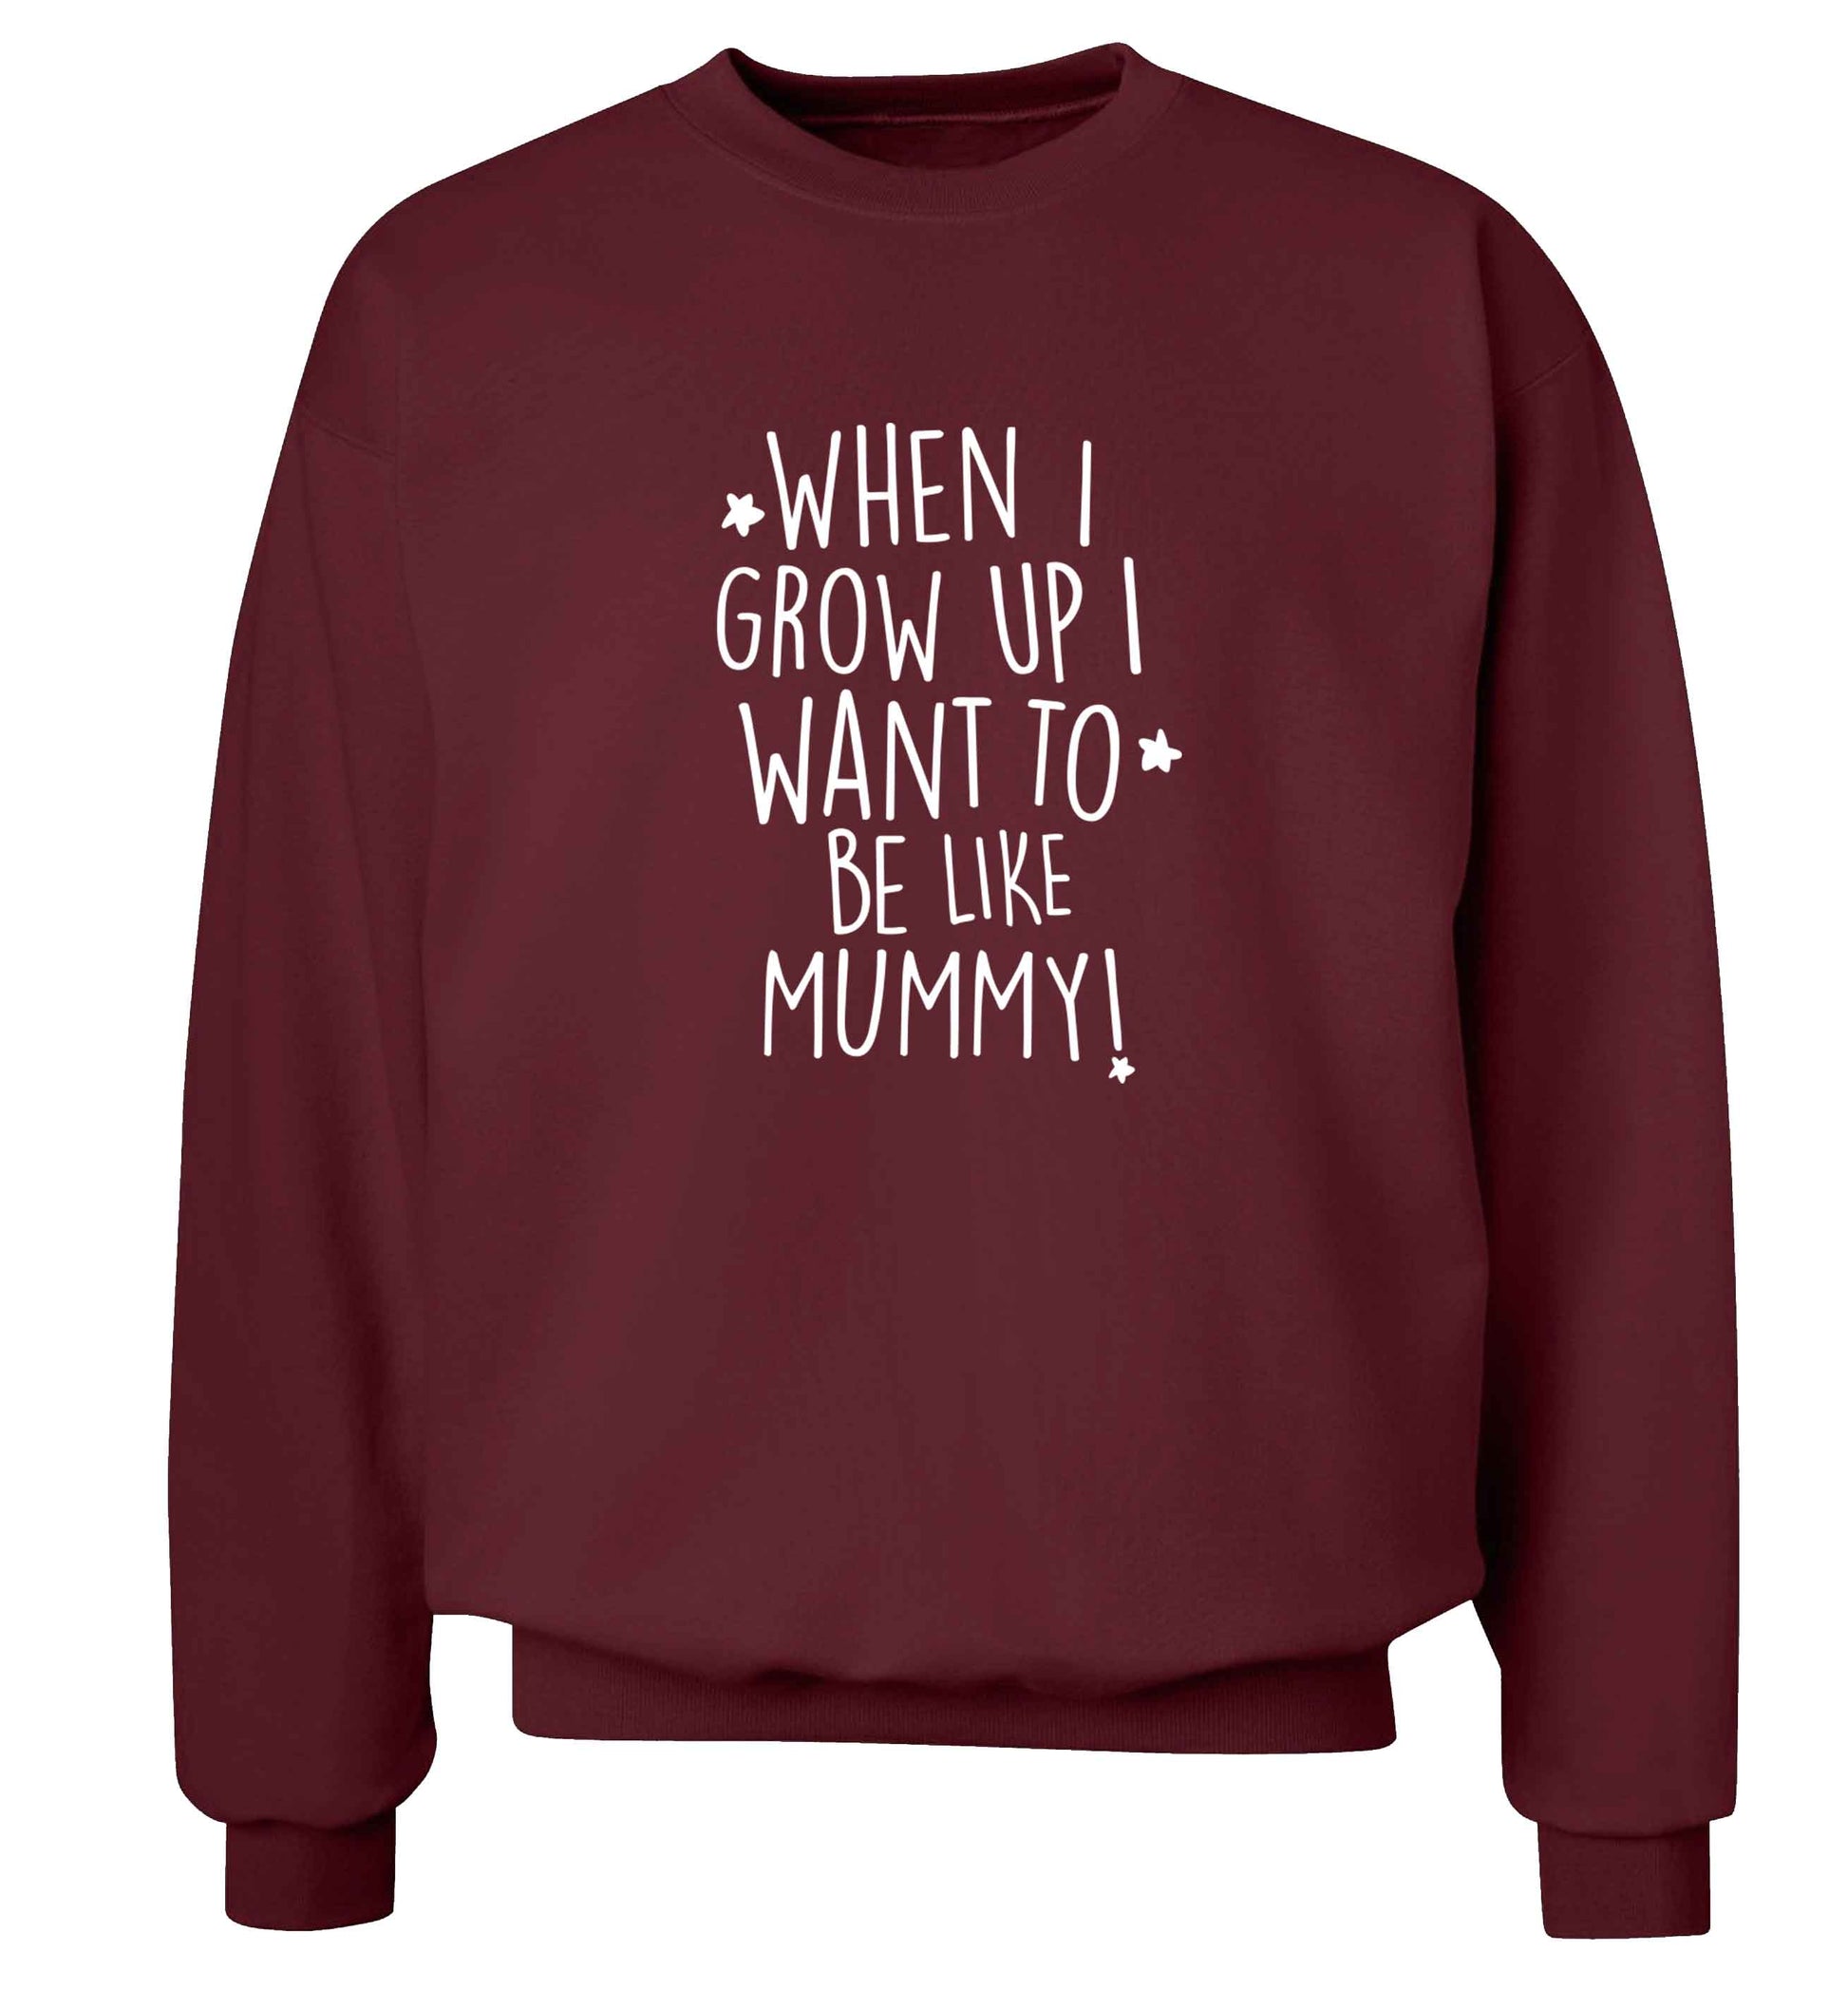 When I grow up I want to be like my mummy adult's unisex maroon sweater 2XL